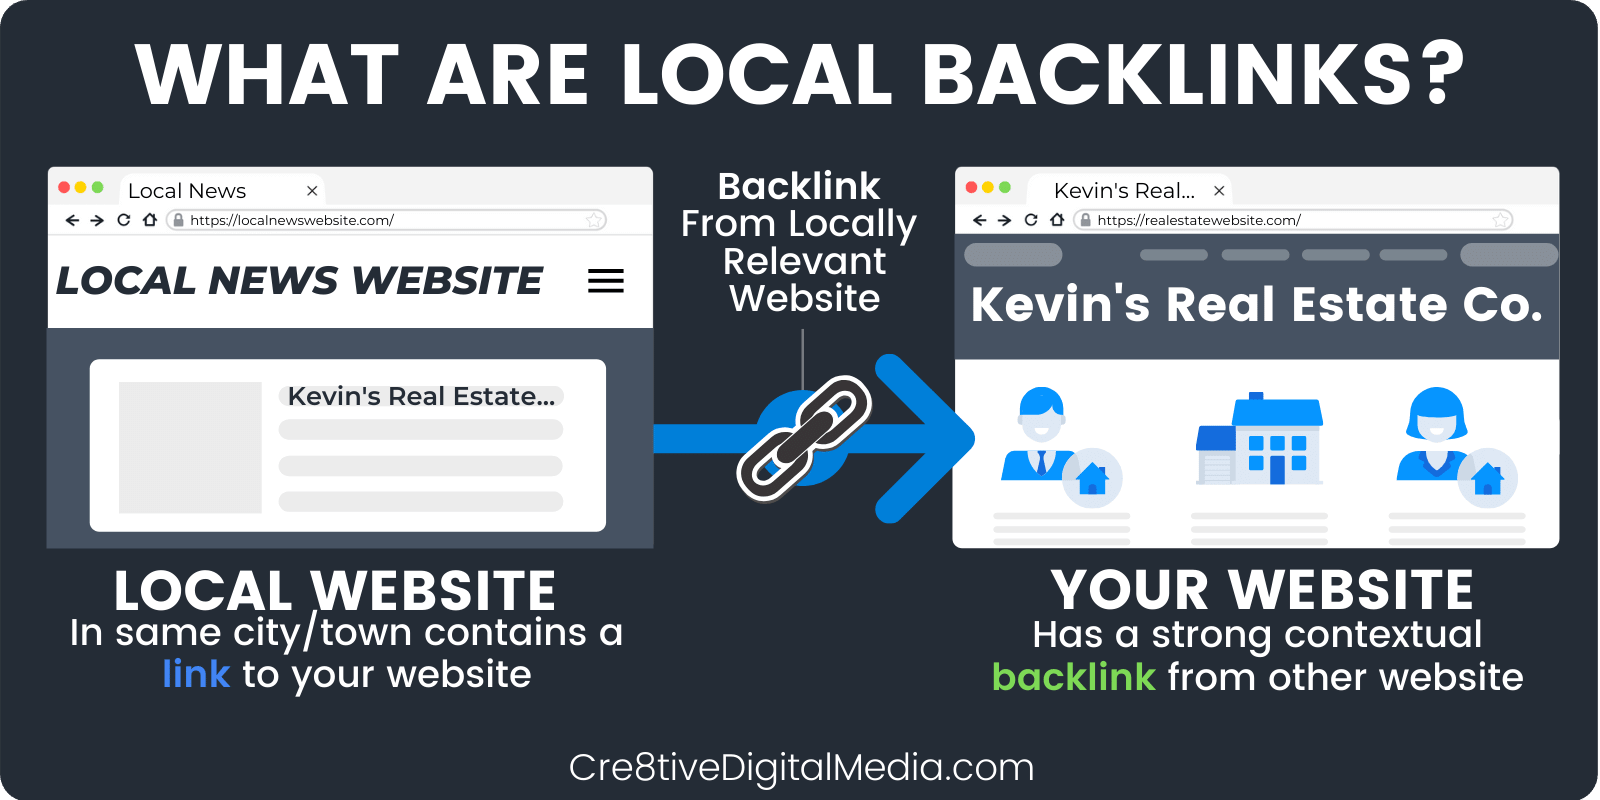 What Are Local Backlinks?